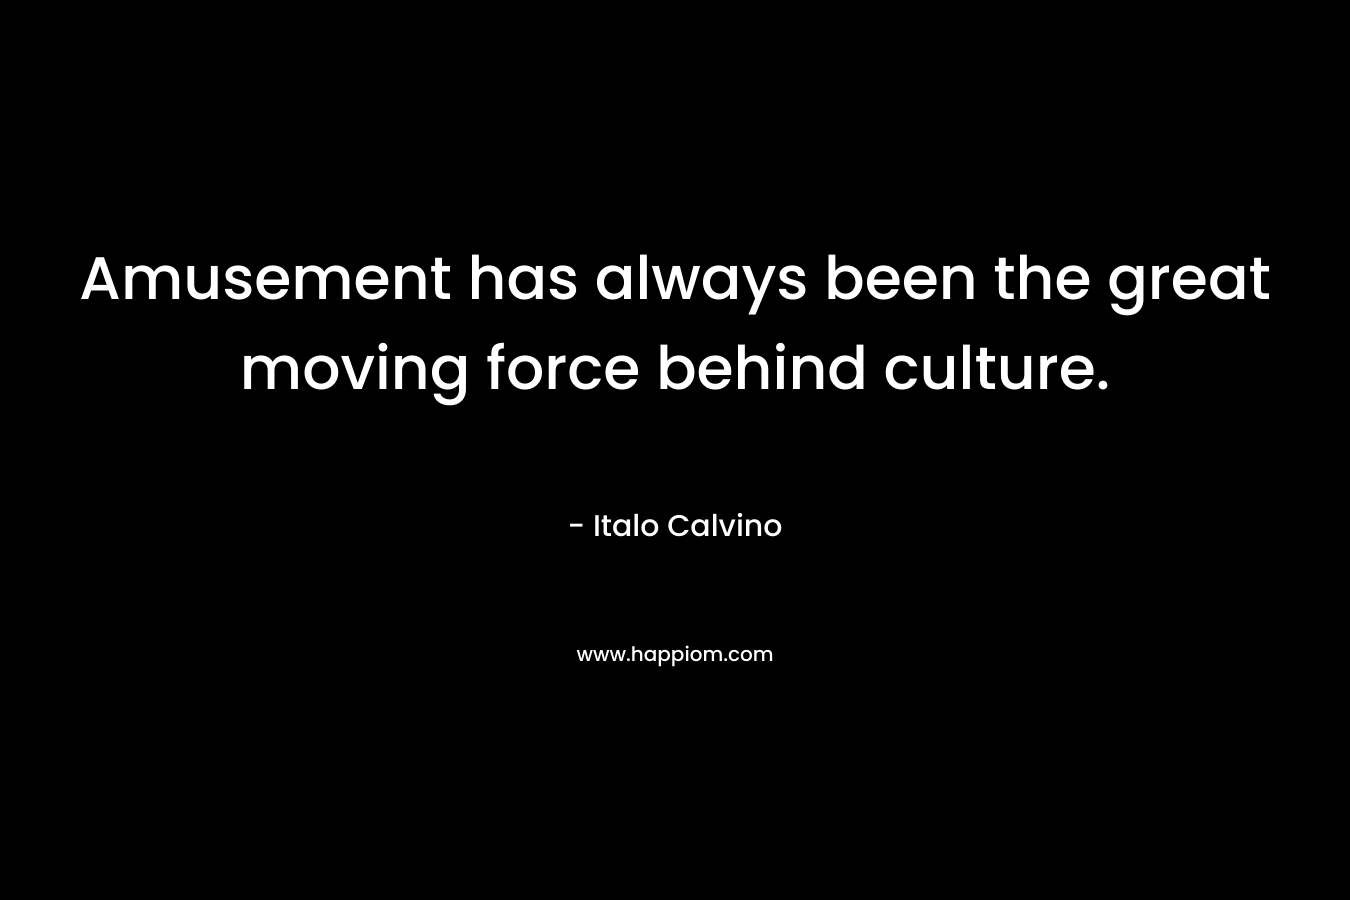 Amusement has always been the great moving force behind culture.